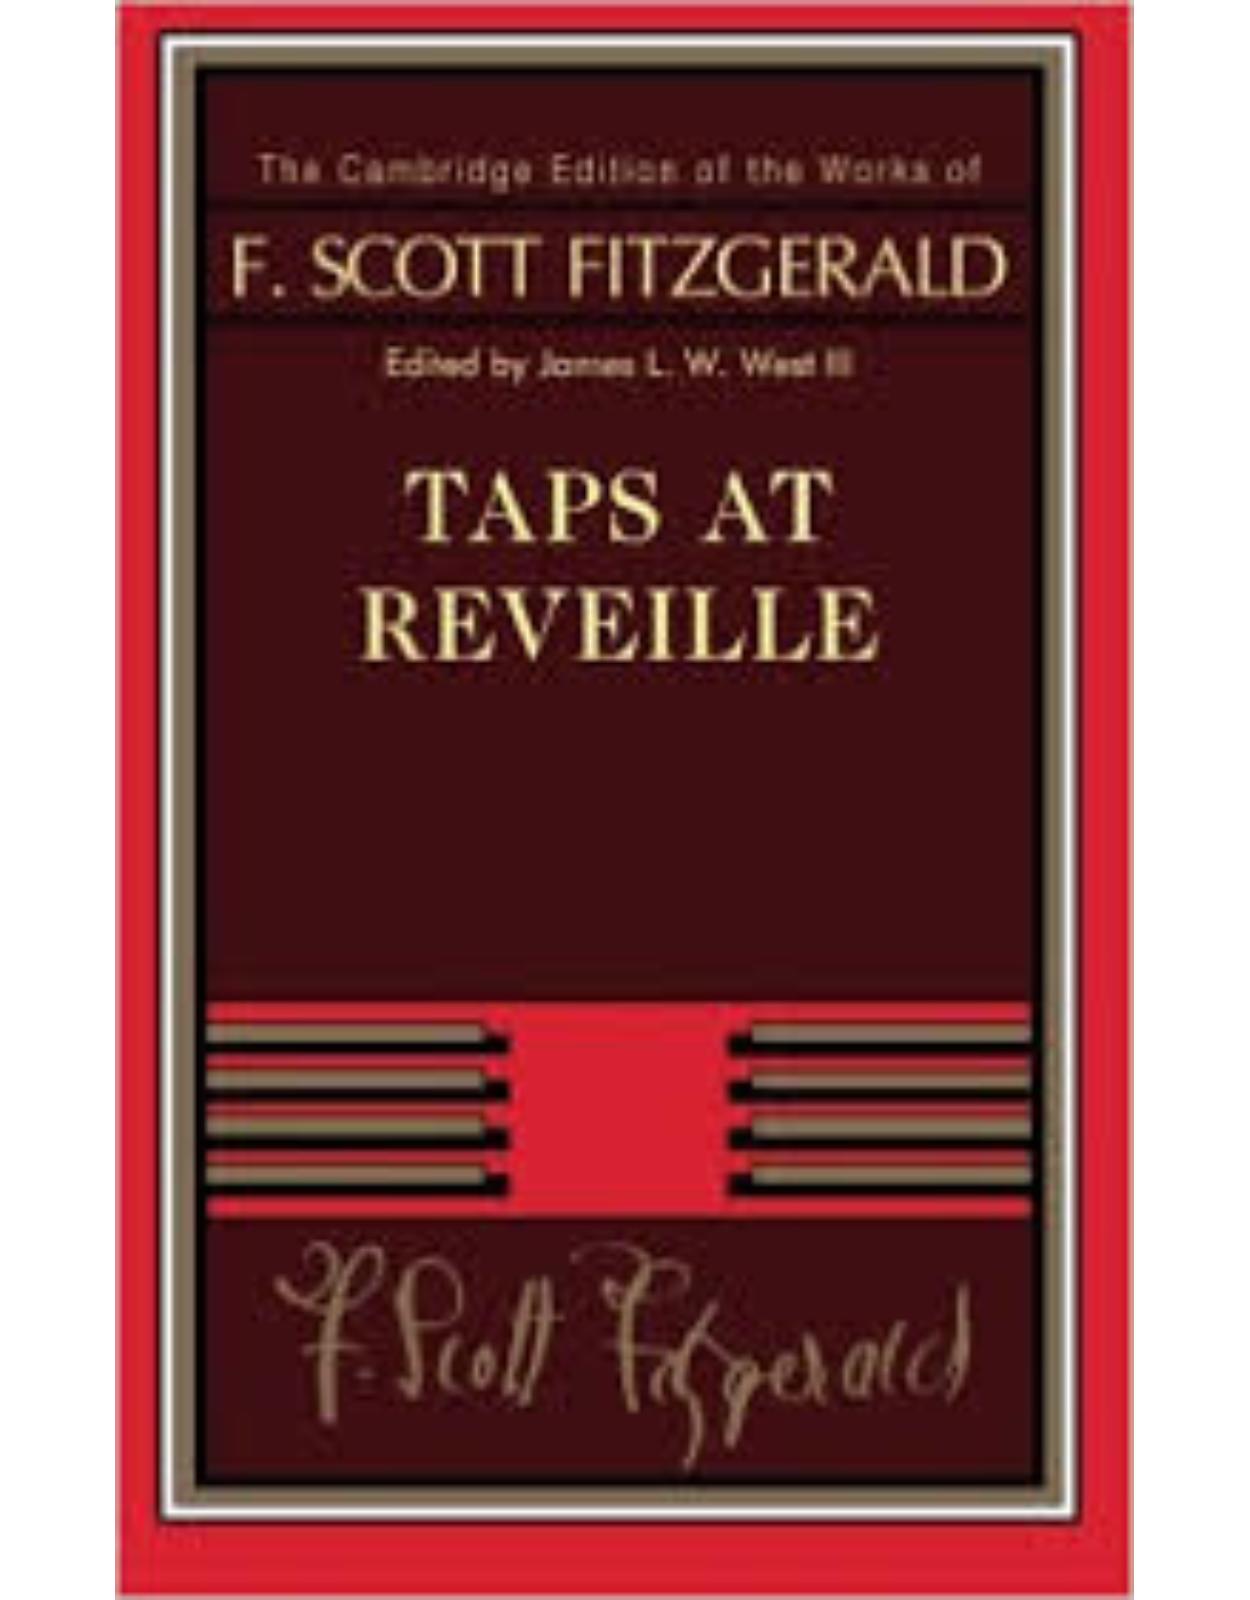 Taps at Reveille (The Cambridge Edition of the Works of F. Scott Fitzgerald) 